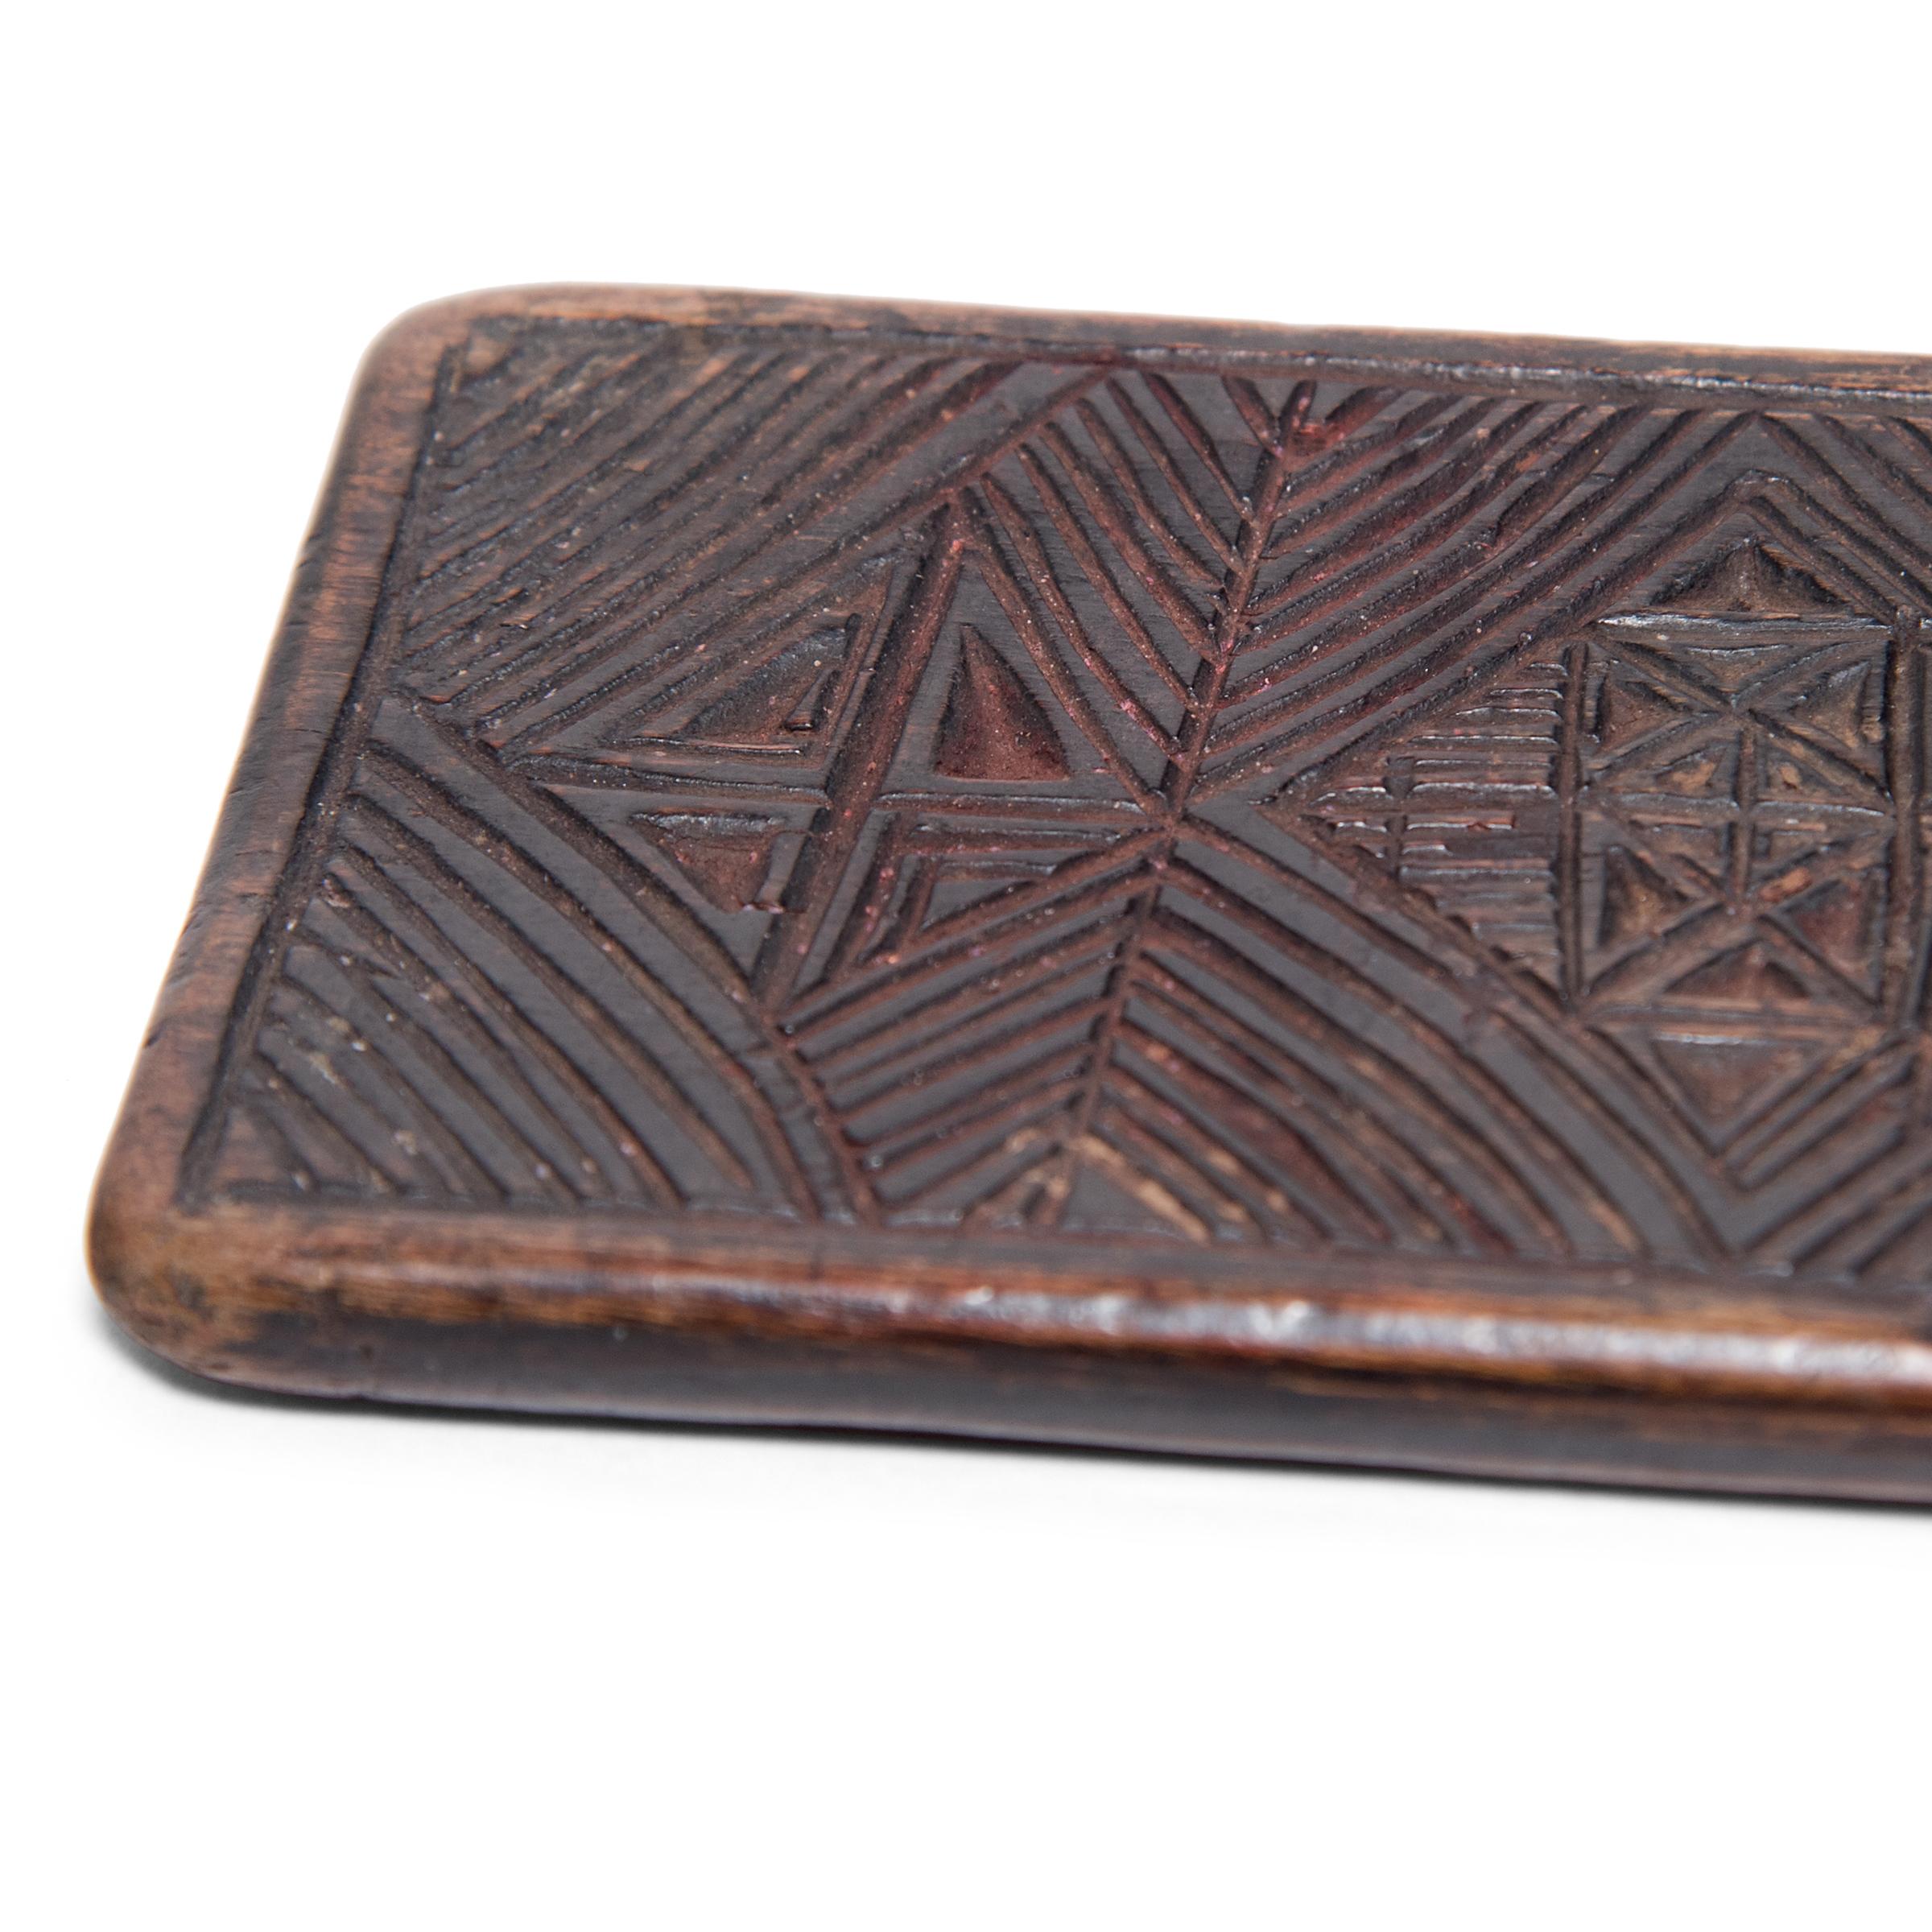 Dated to the 19th century, this flat wooden panel is curiously etched with geometric patterns and dense triangle-work. Its original use remains unknown, perhaps it was a divination tool, a traveling game board, or a weight to hold open a scroll. A